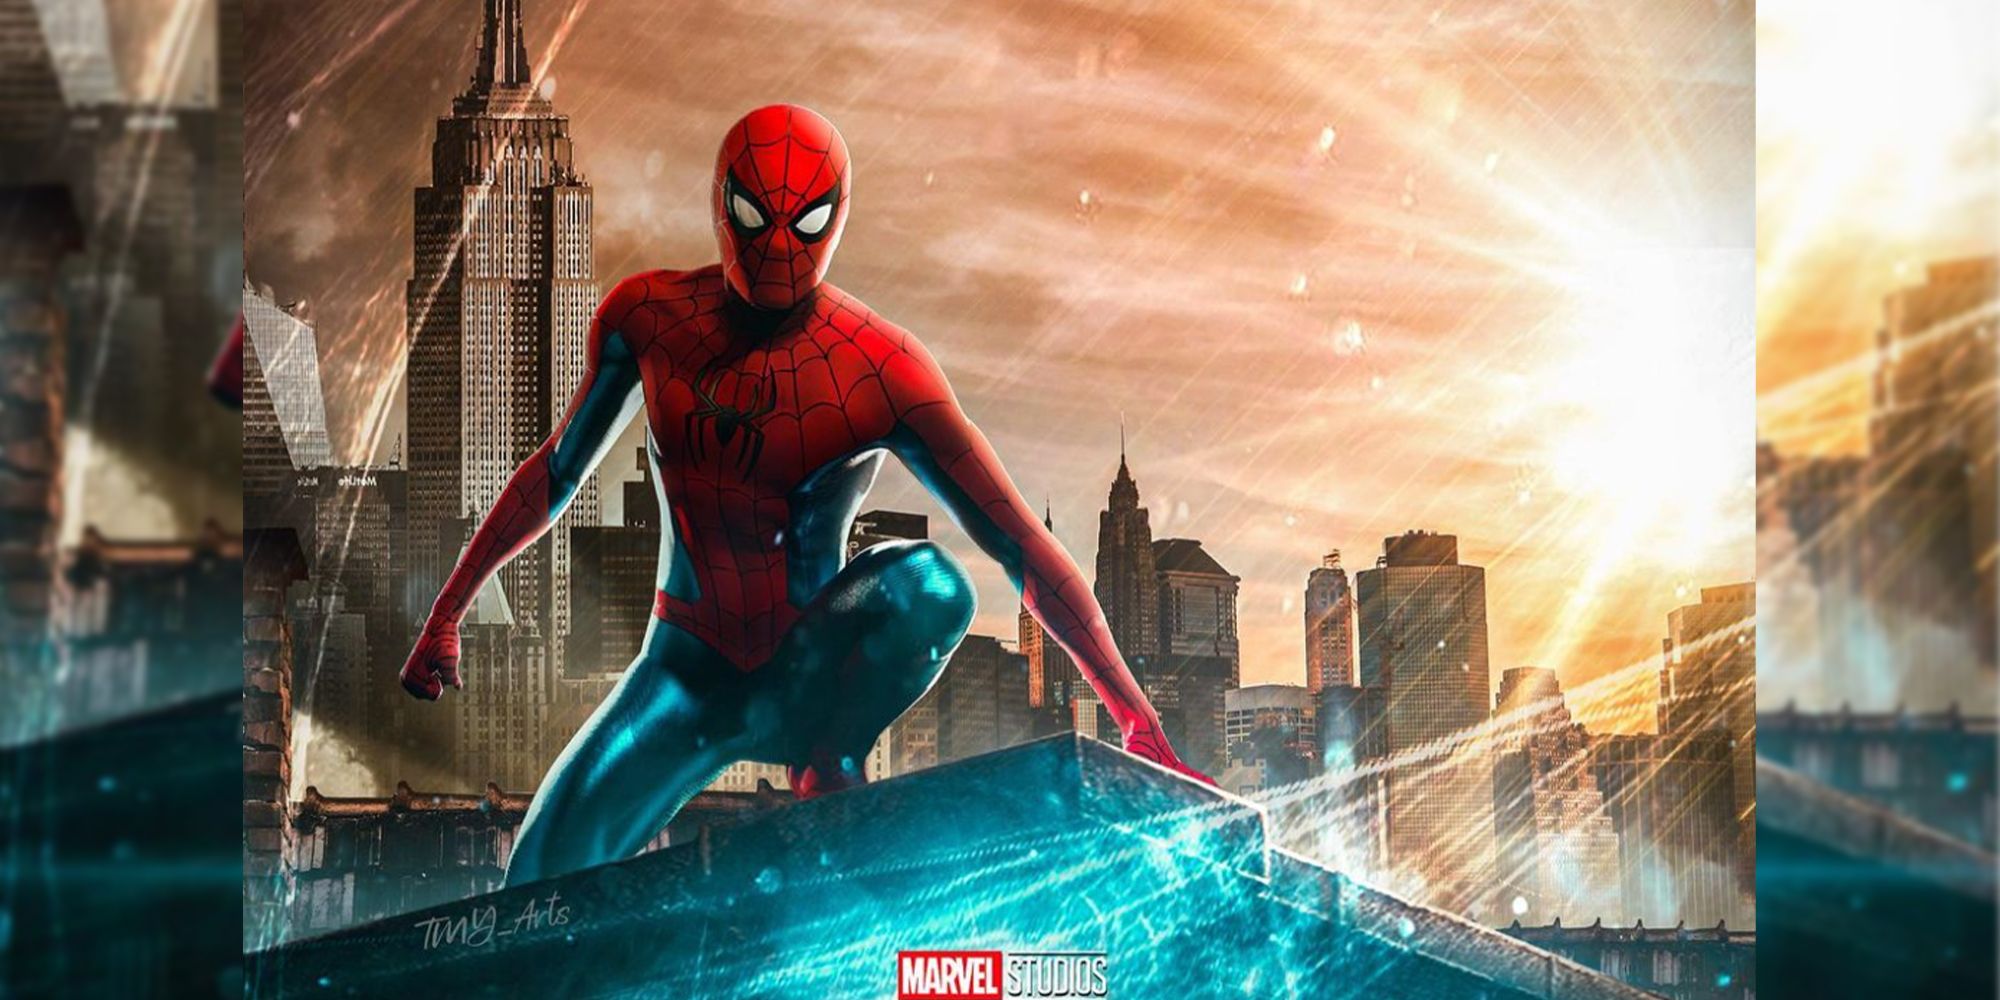 SpiderMan 4 Fan Poster Has Perfect Title For Tom Holland’s Next MCU Movie